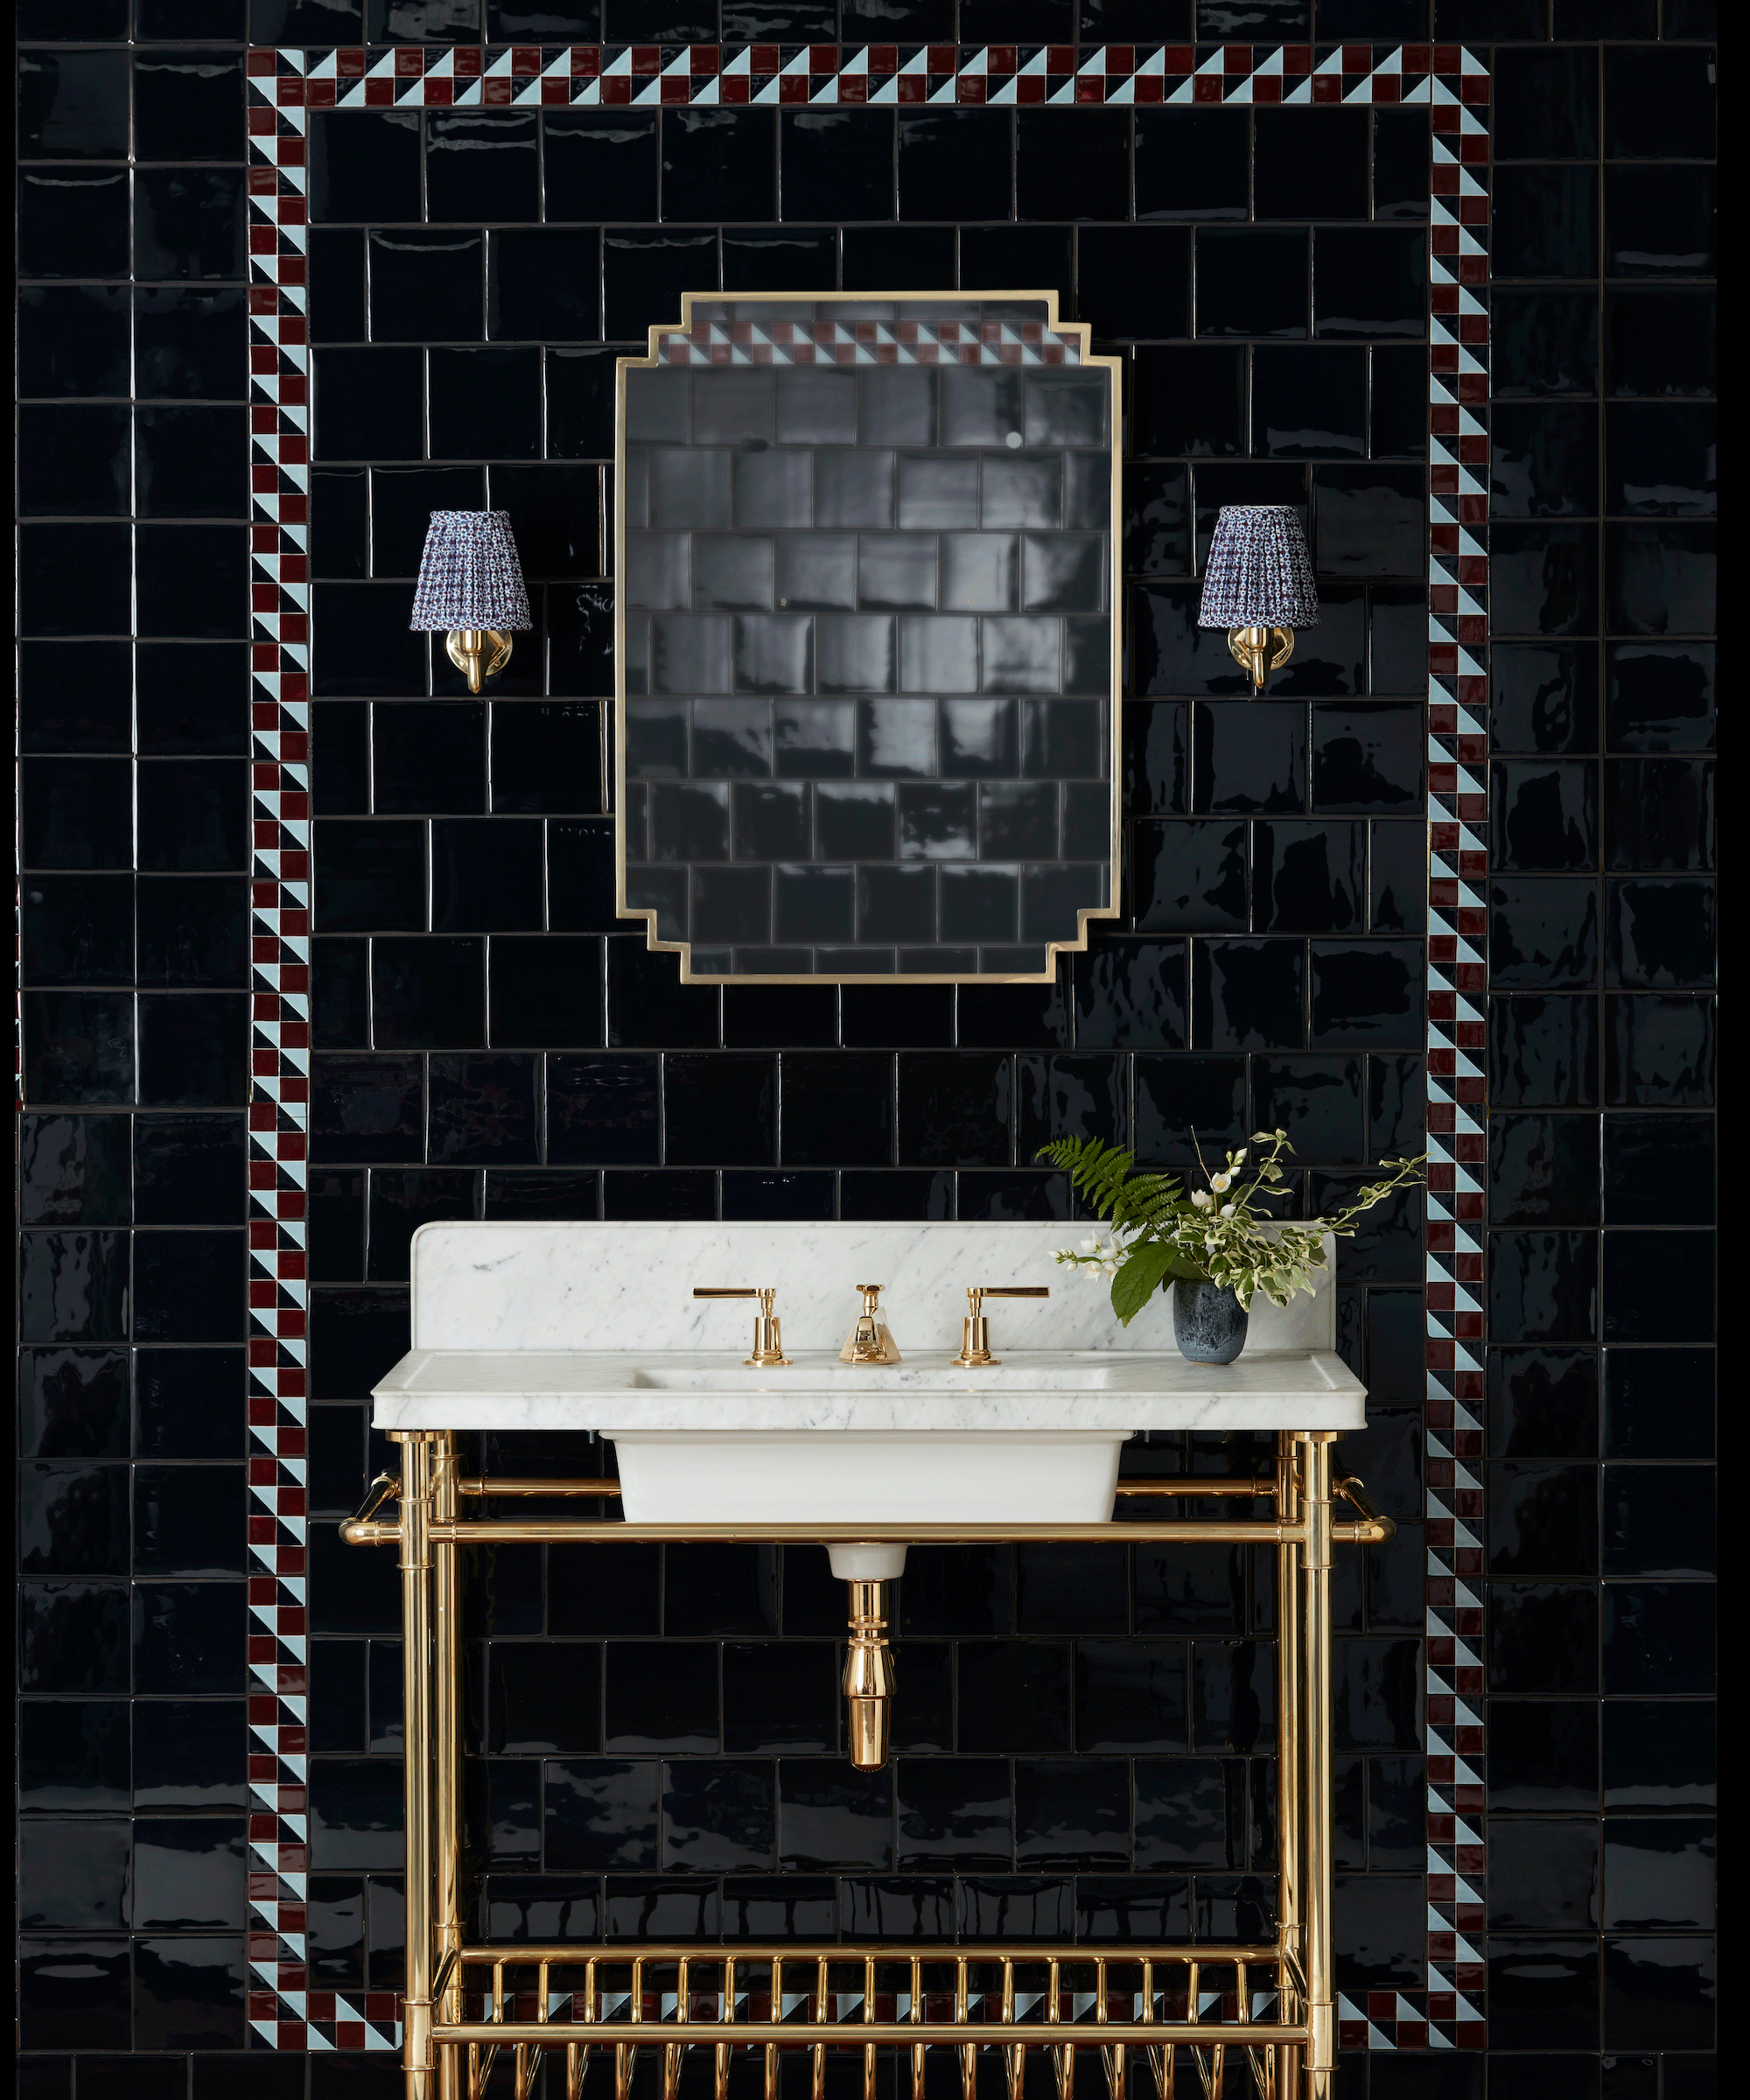 Bathroom sink with black glossy wall tiles and a decorative border